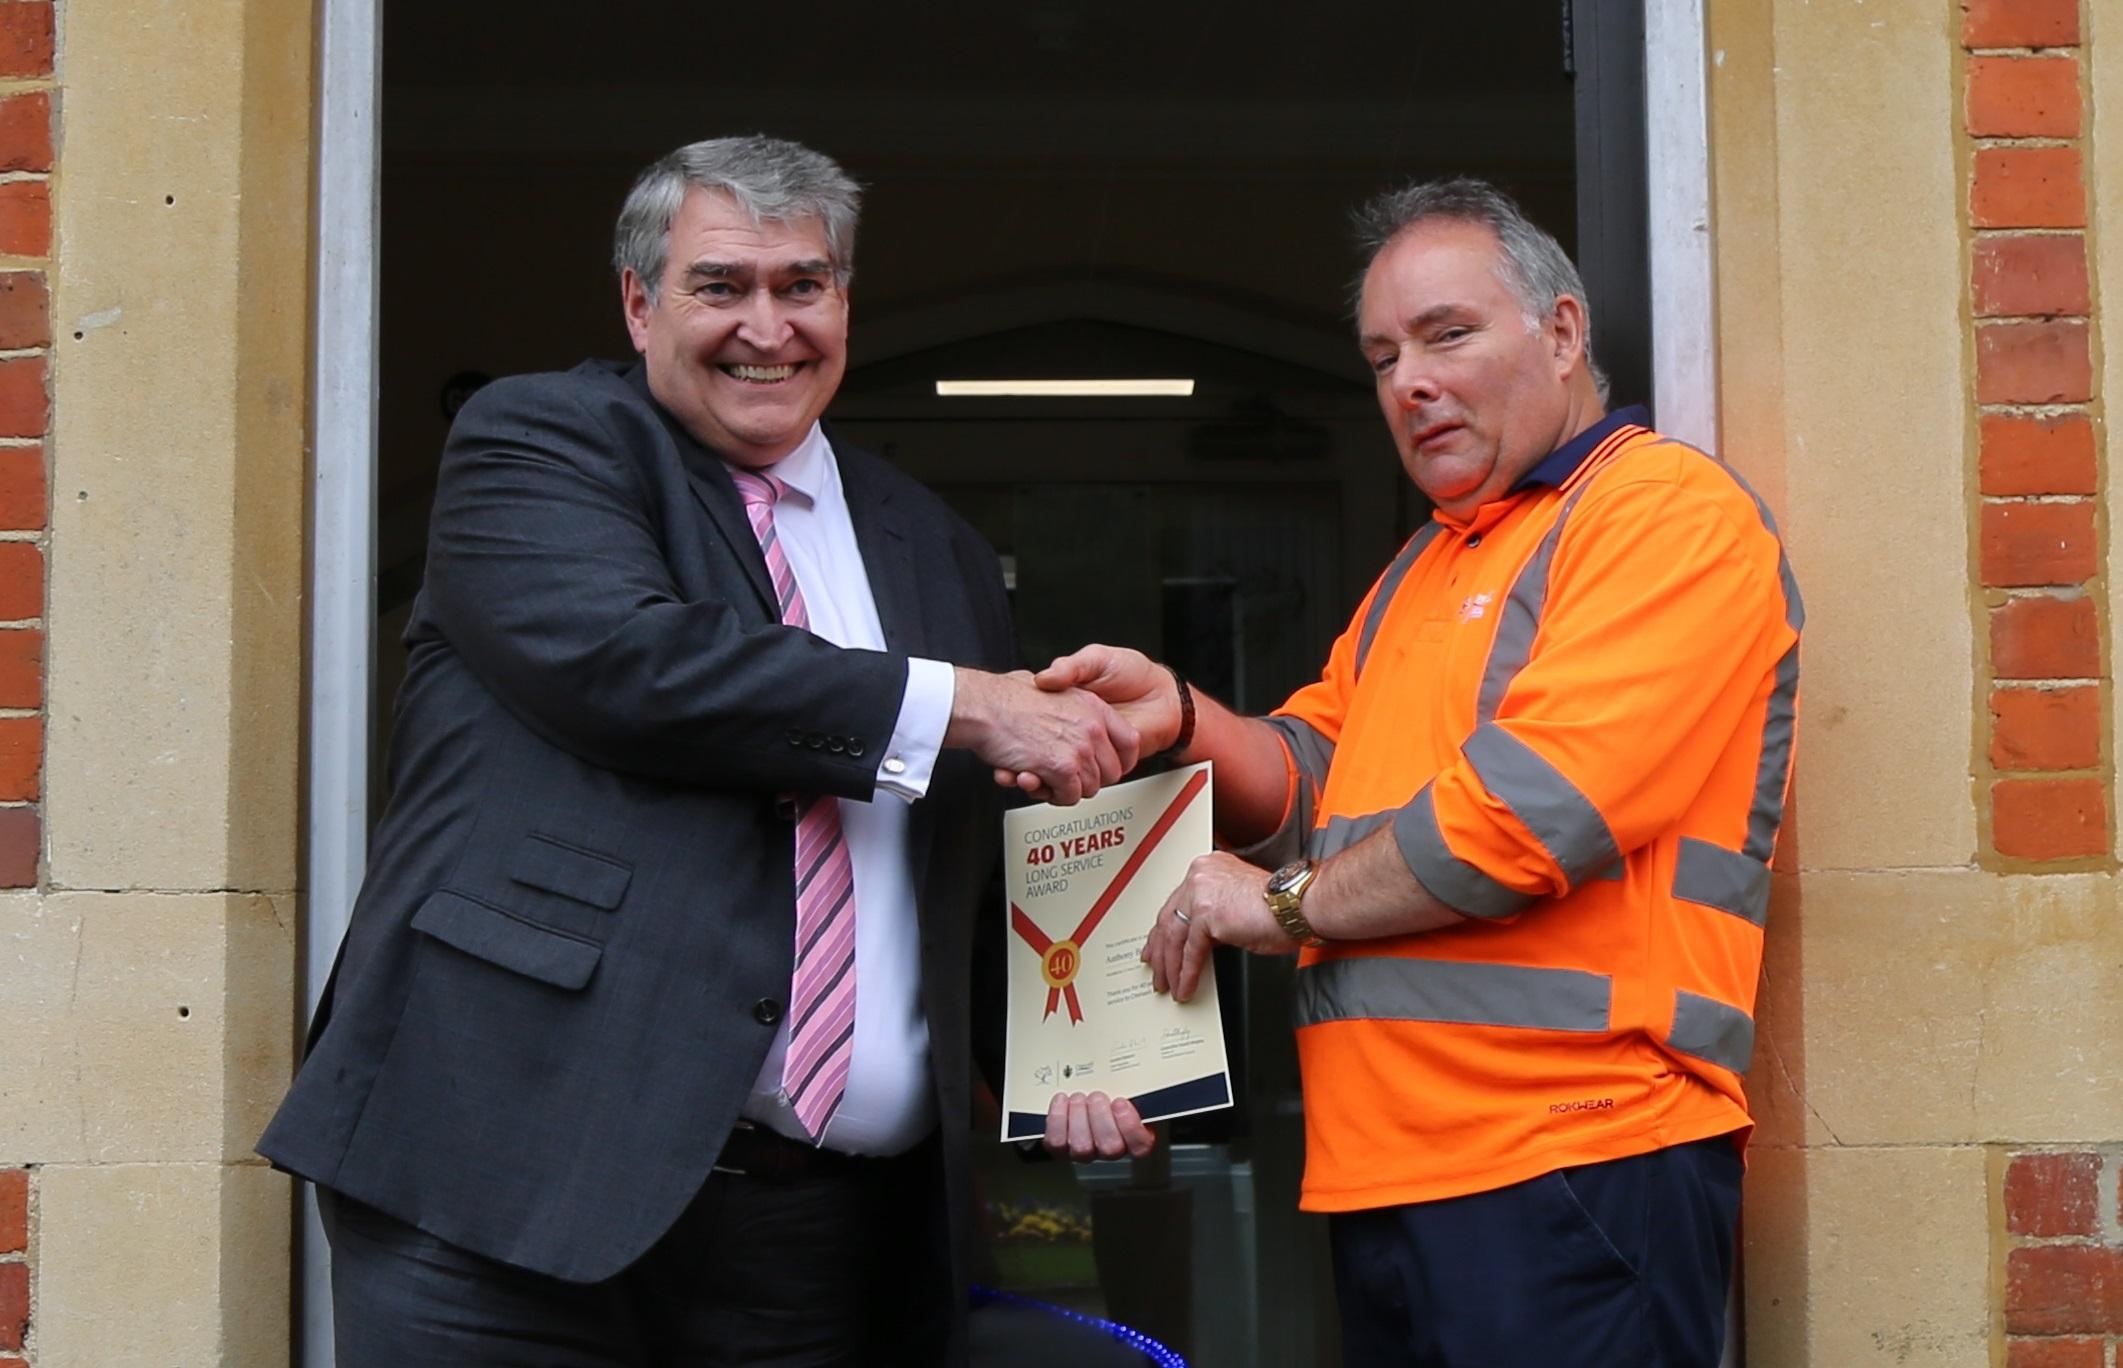 Gordon Stewart, Chief Executive, and Tony Bates, street cleansing operative, are pictured below with Tony receiving his long service award.